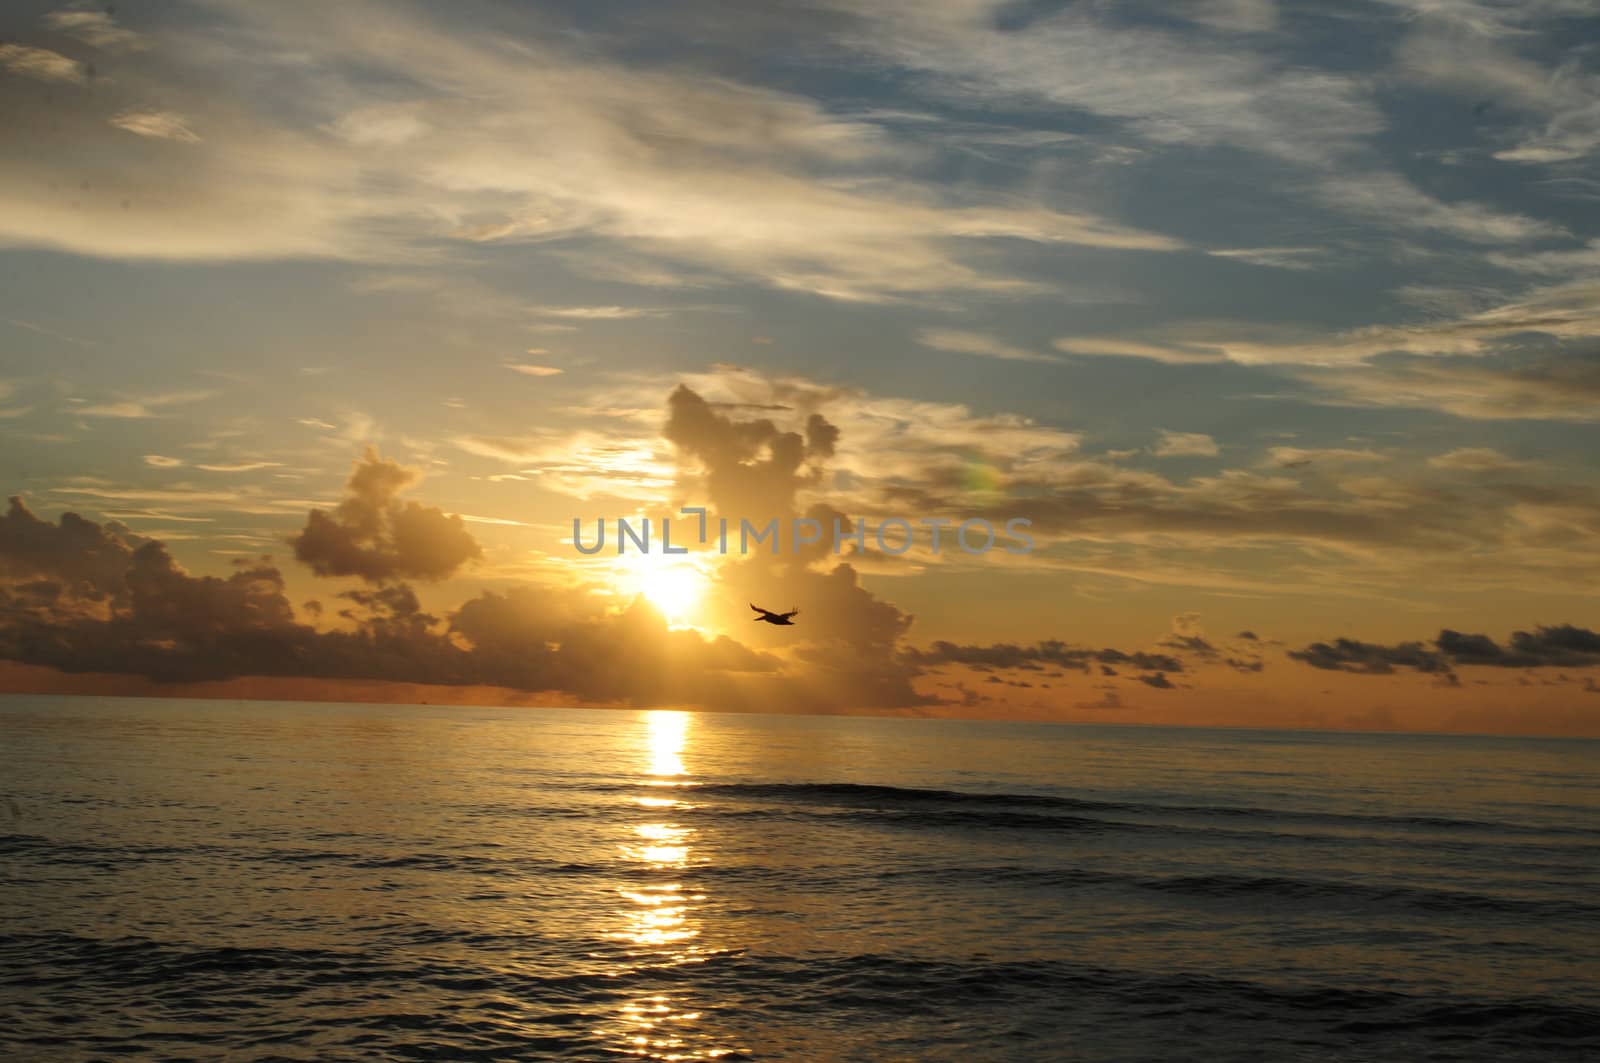 Early morning ocean sunrise and bird by ftlaudgirl